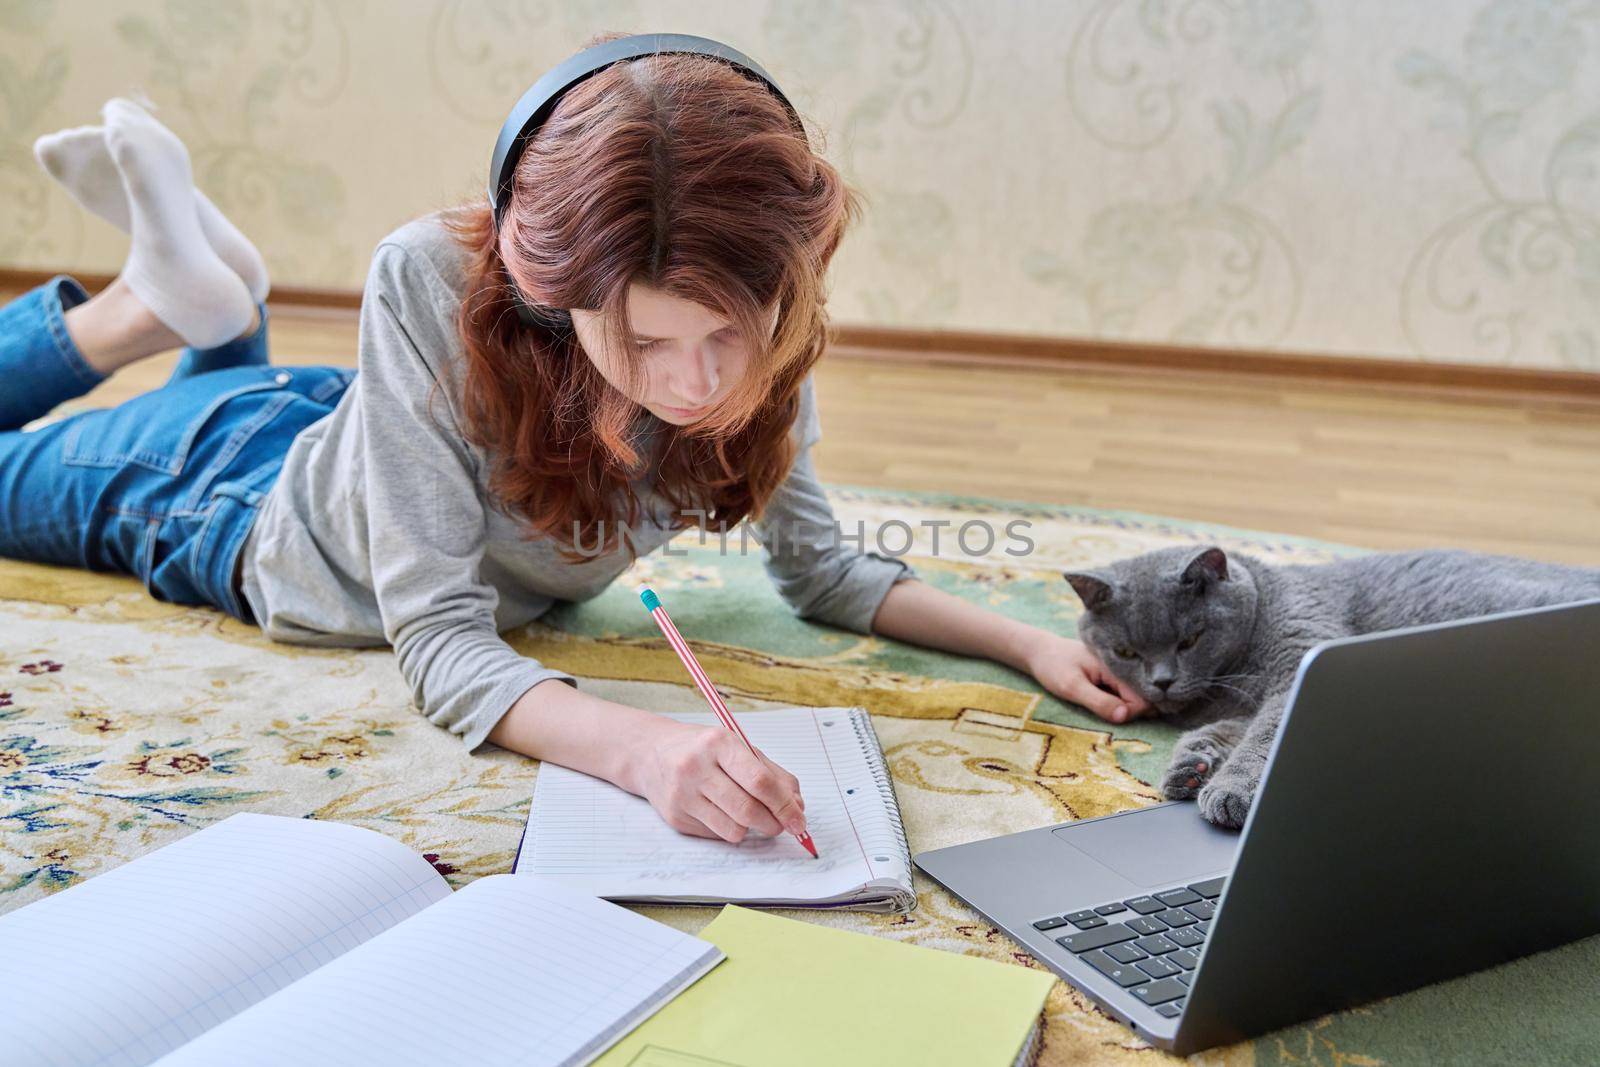 Preteen girl studying in headphones with laptop lying on floor with cat. Young female student using laptop, writing in notebook. School, learning, distance education, homework, pets lifestyle concept